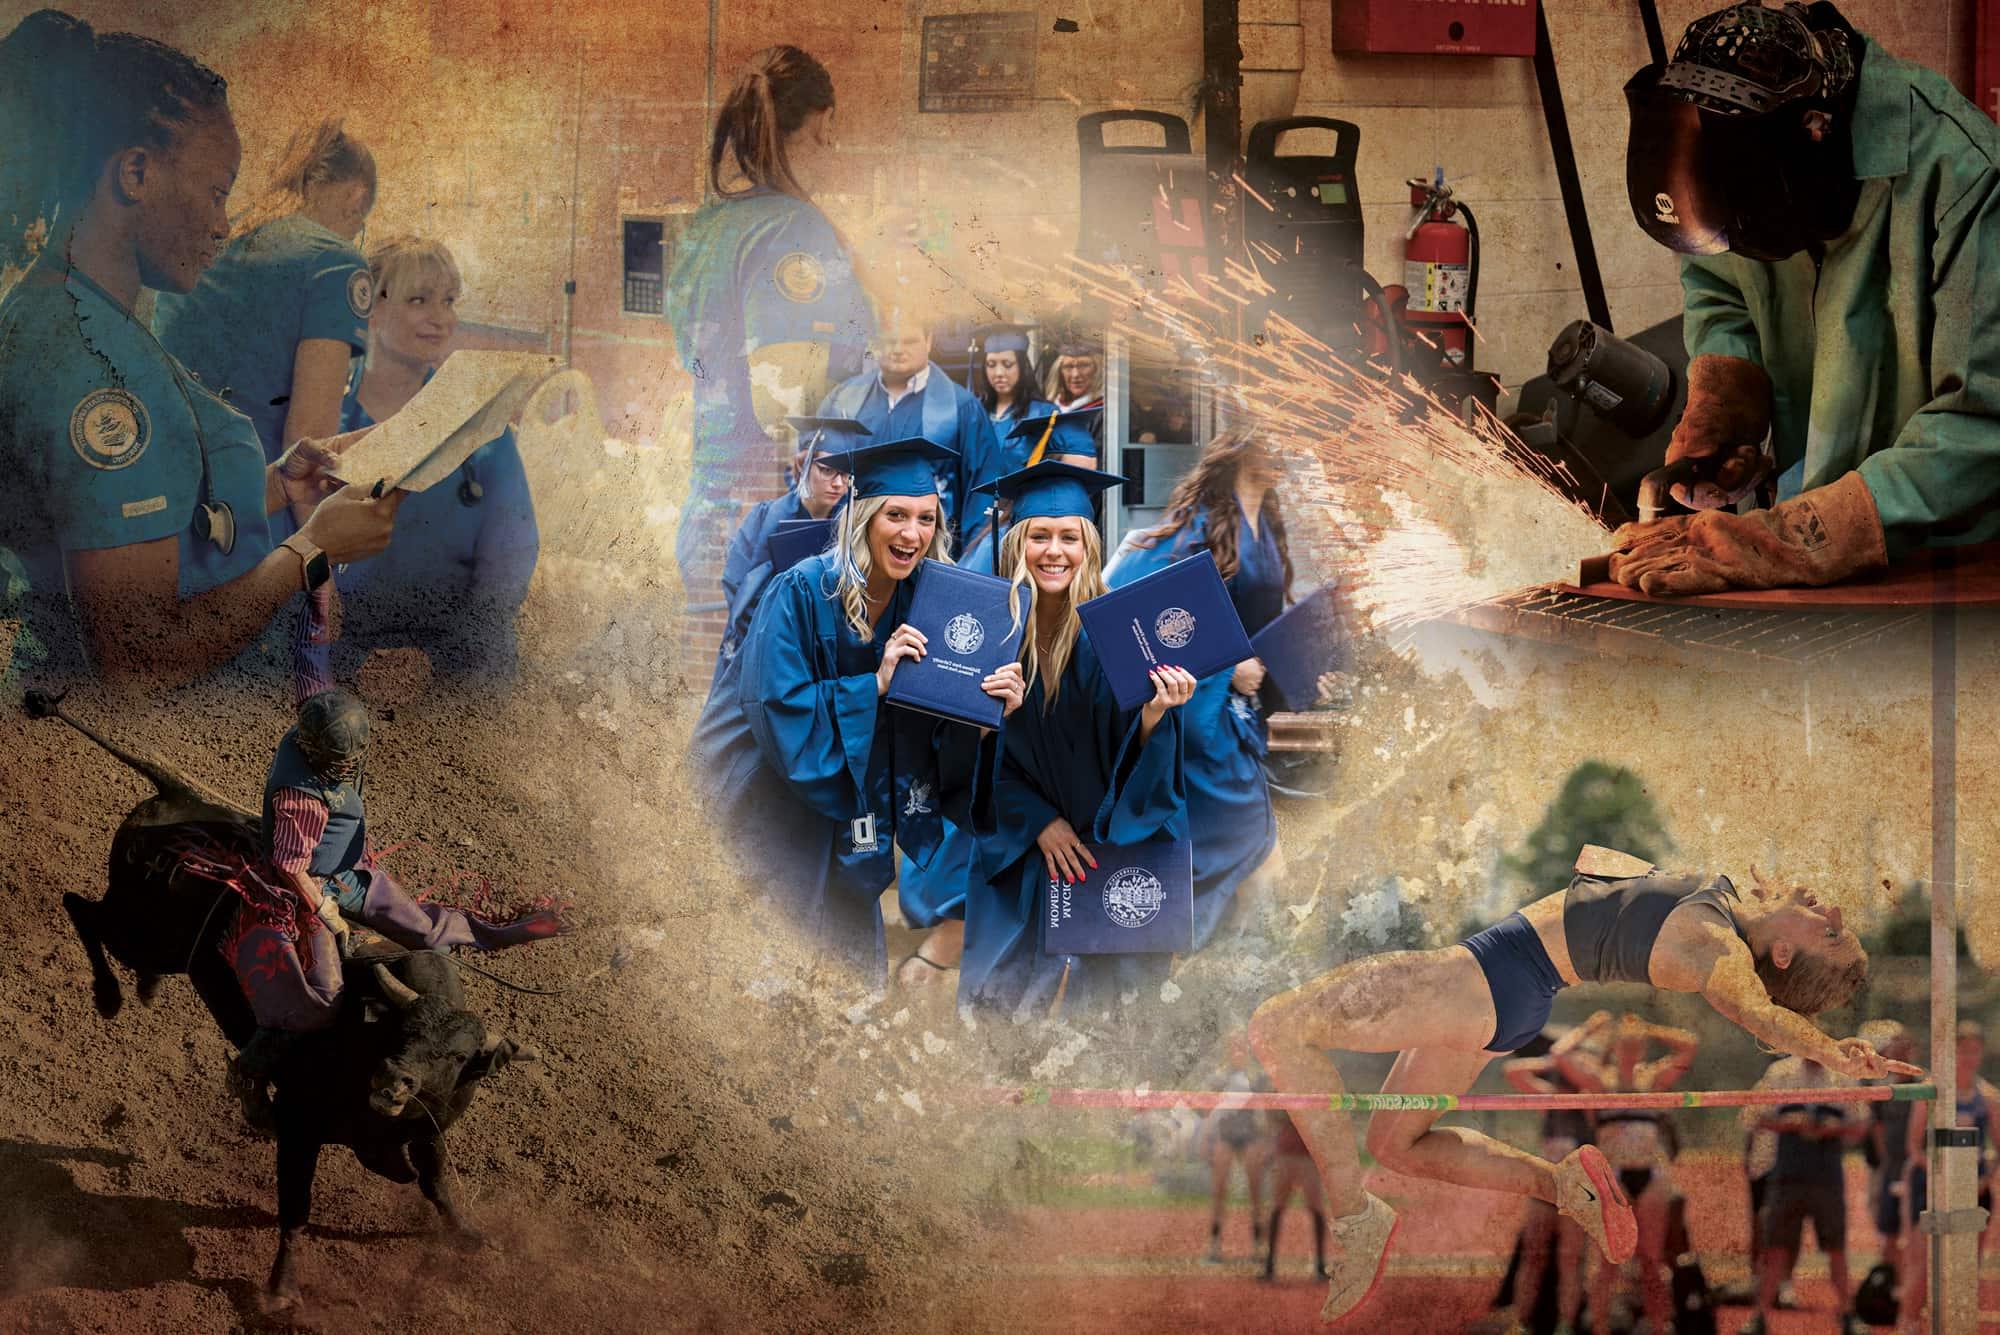 College of various student. A welder, nursing student, pole vaulter, bull rider and two students at commencement.